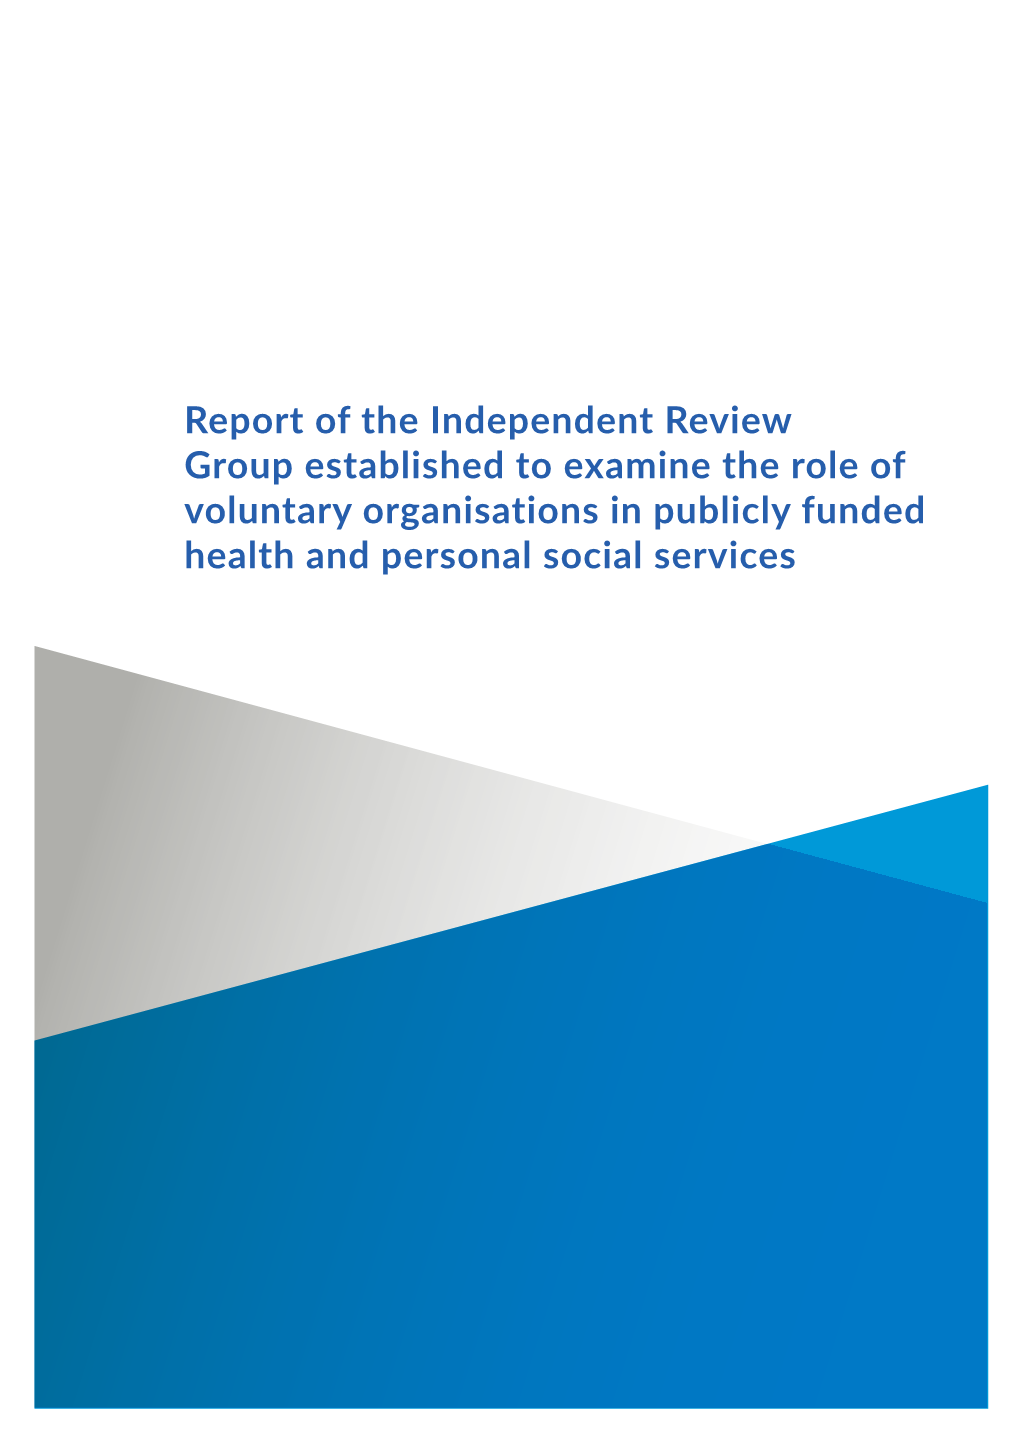 The Independent Review Group Established to Examine the Role of Voluntary Organisations in Publicly Funded Health and Personal Social Services Contents